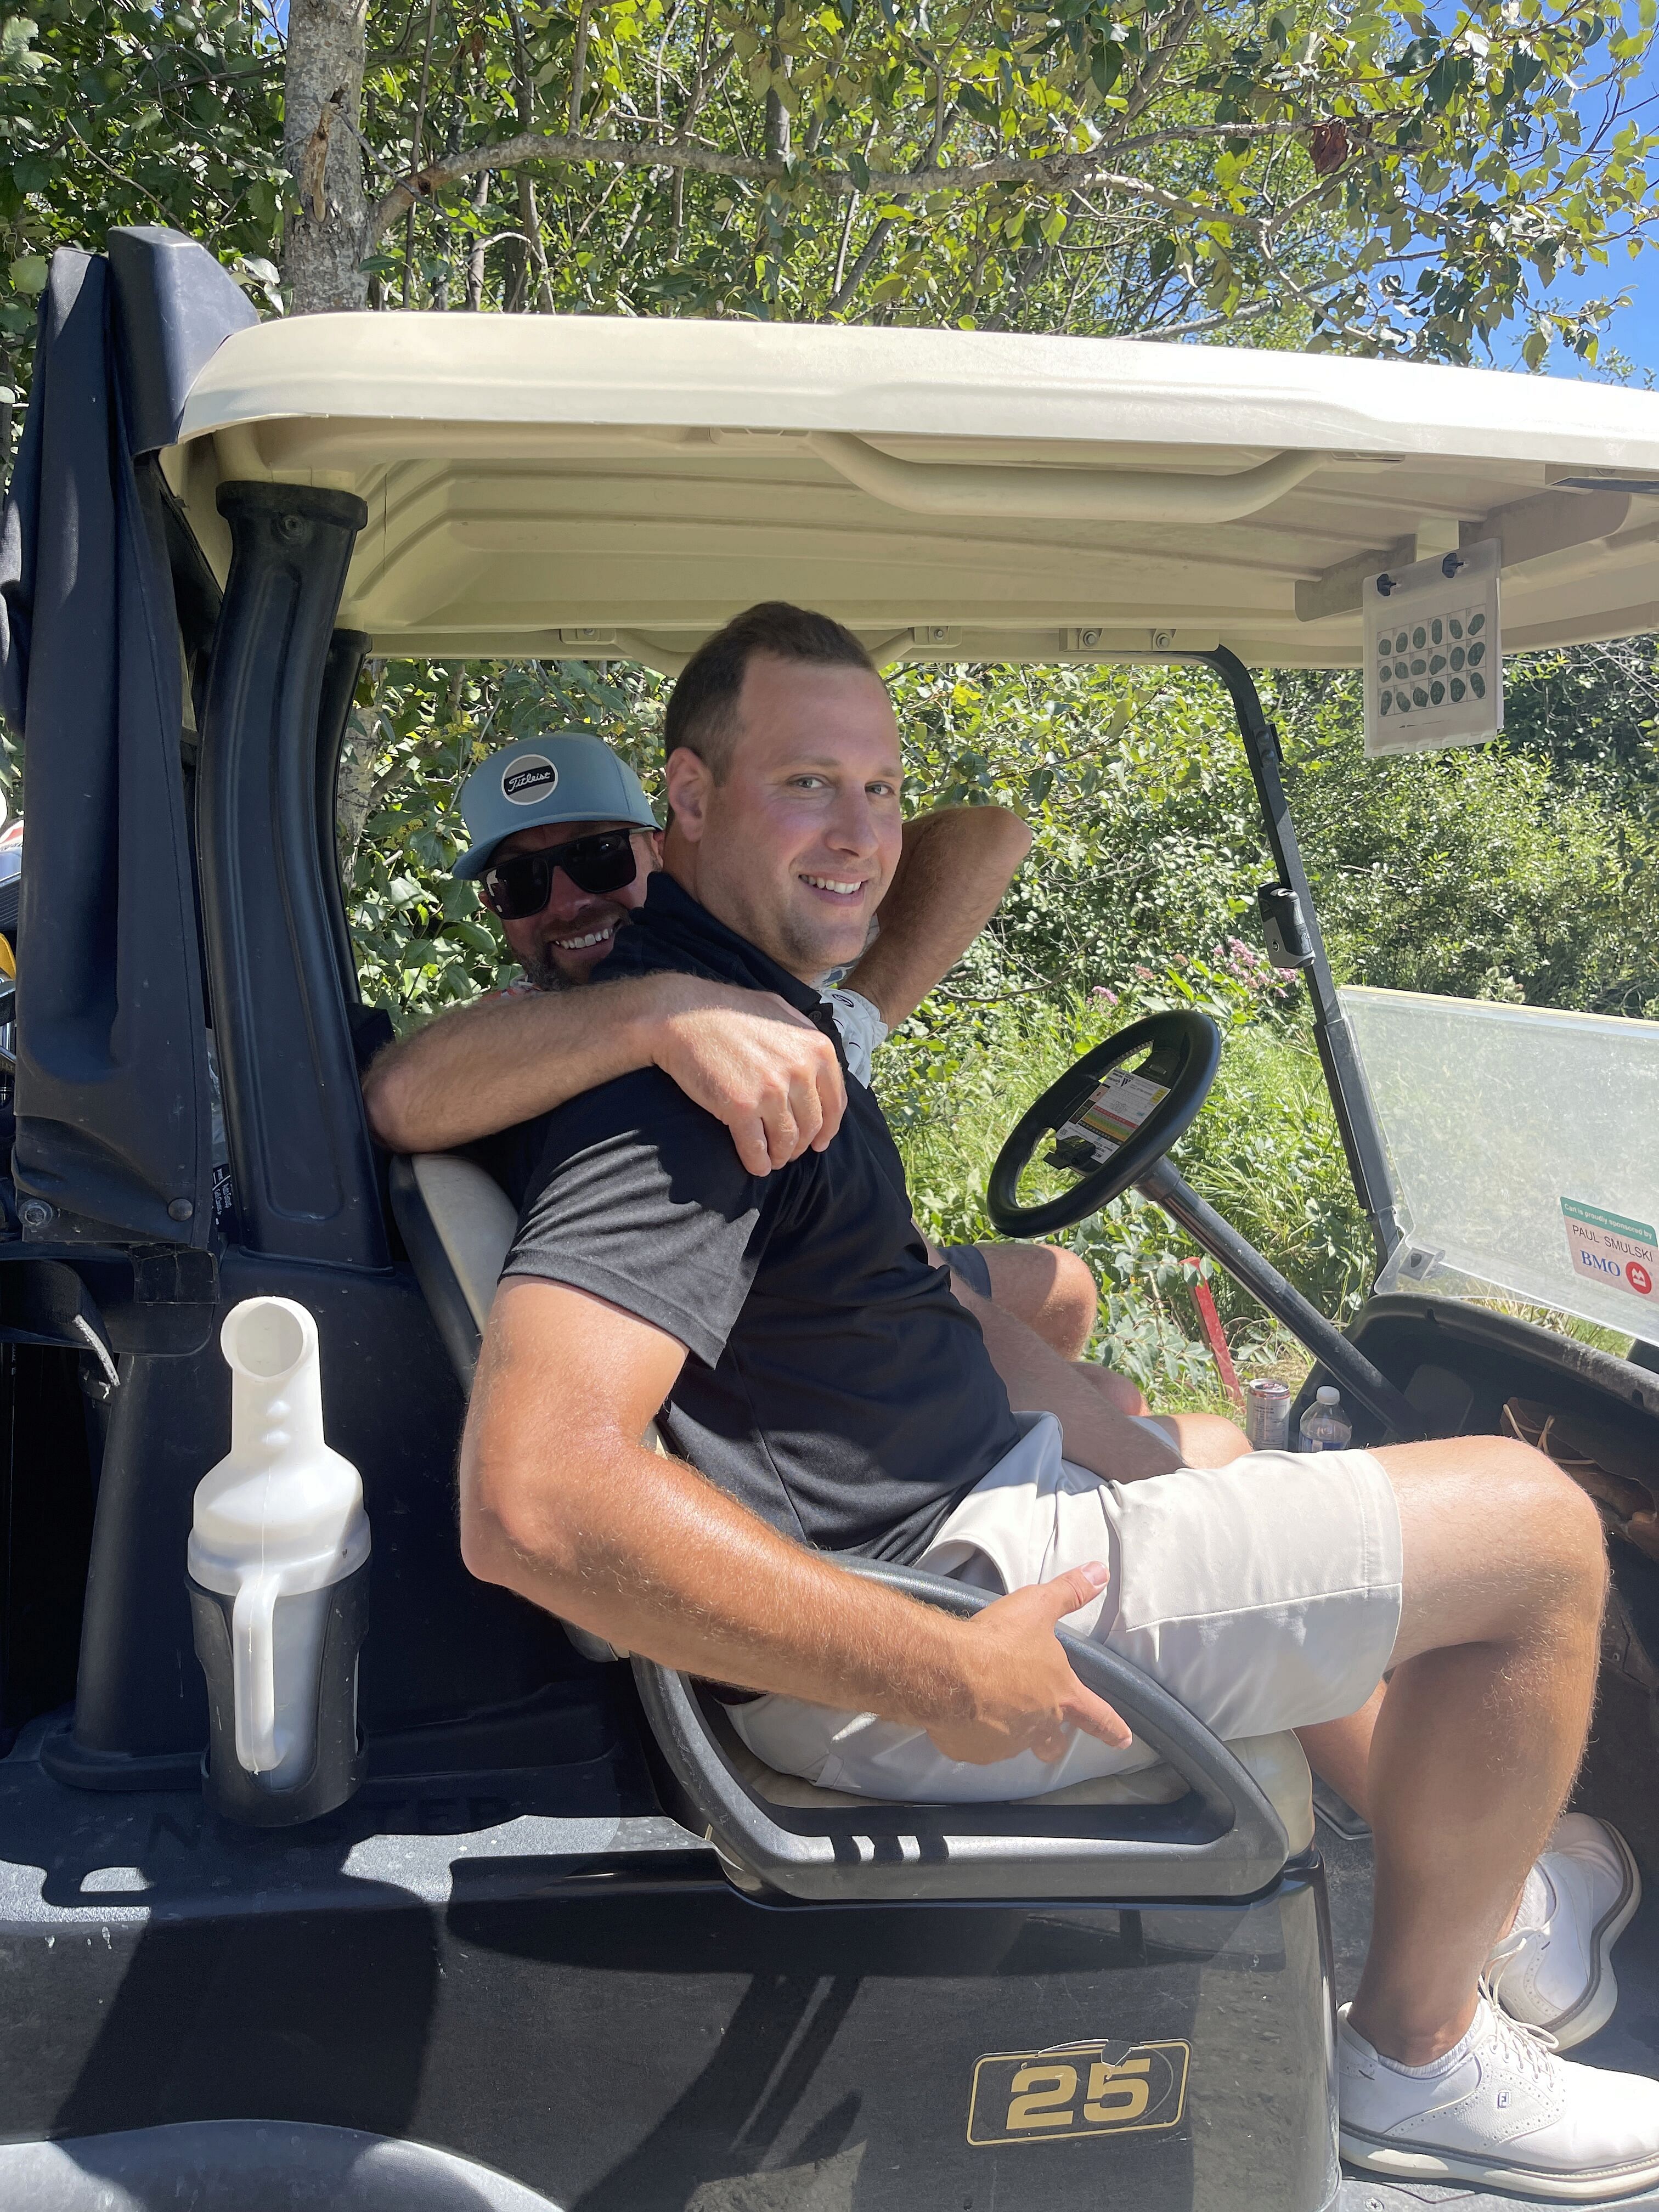 Two smiling men in a golf cart.